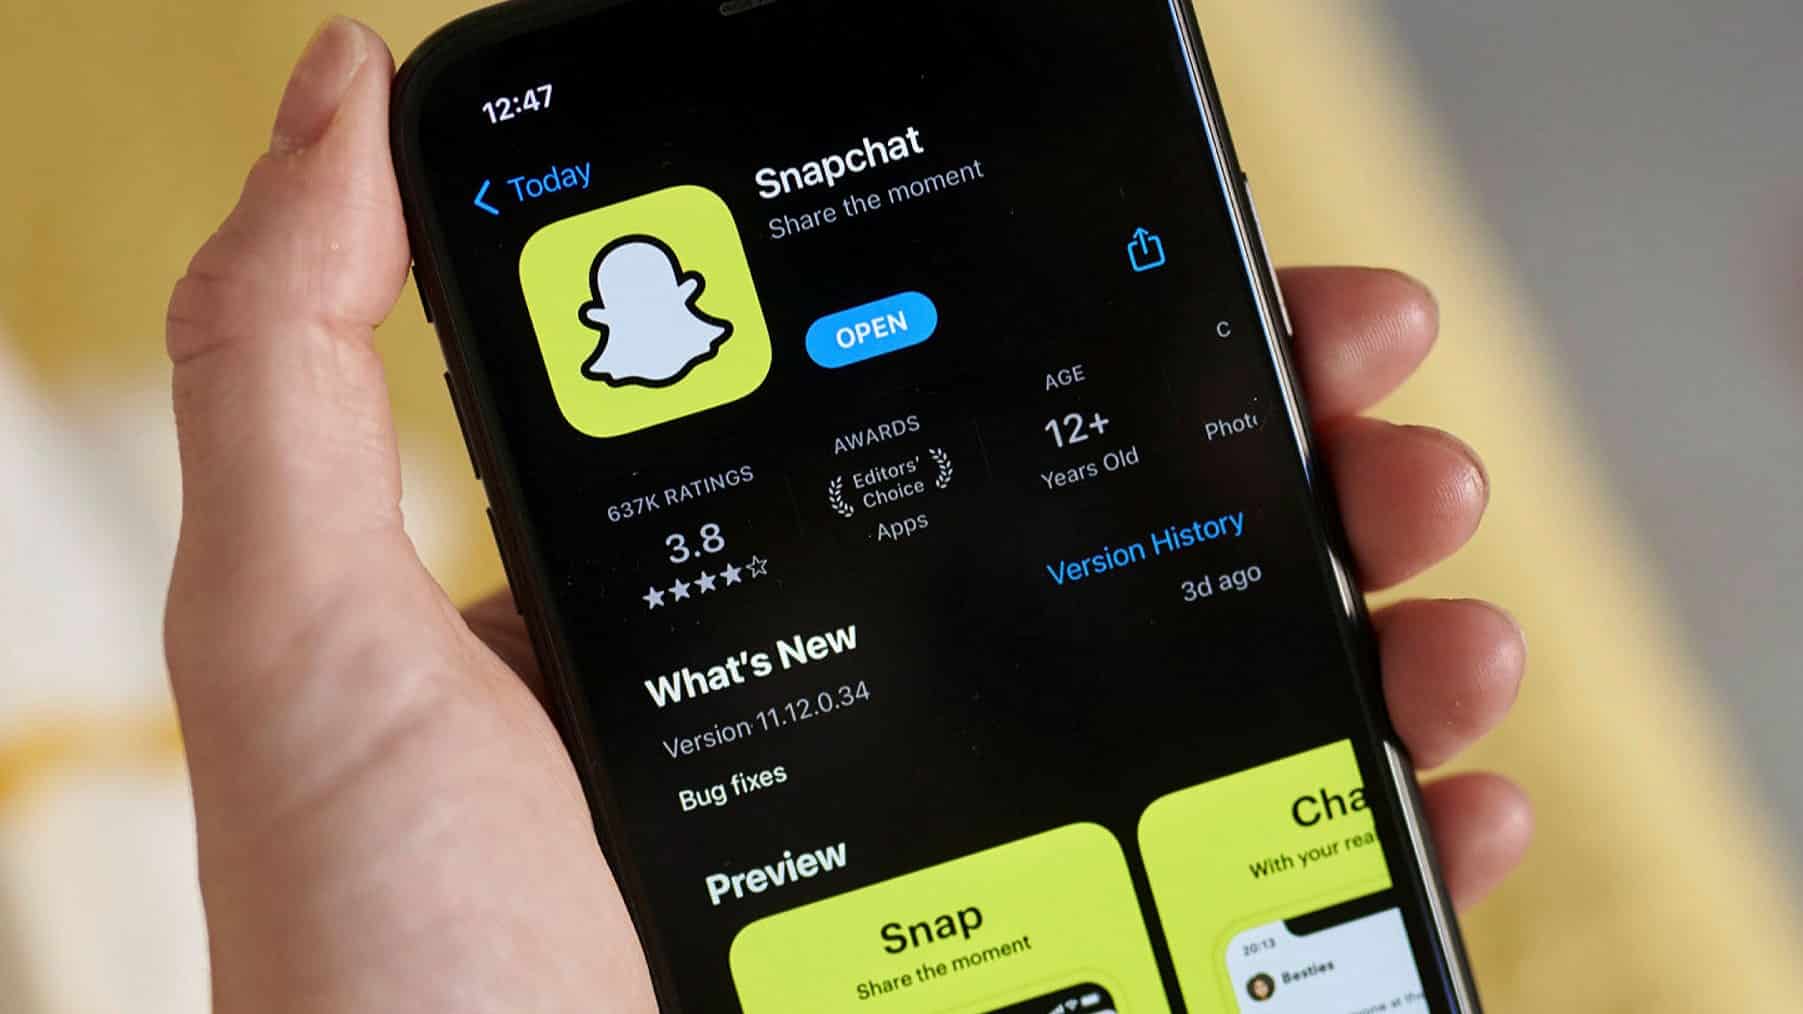 Snapchat Overview